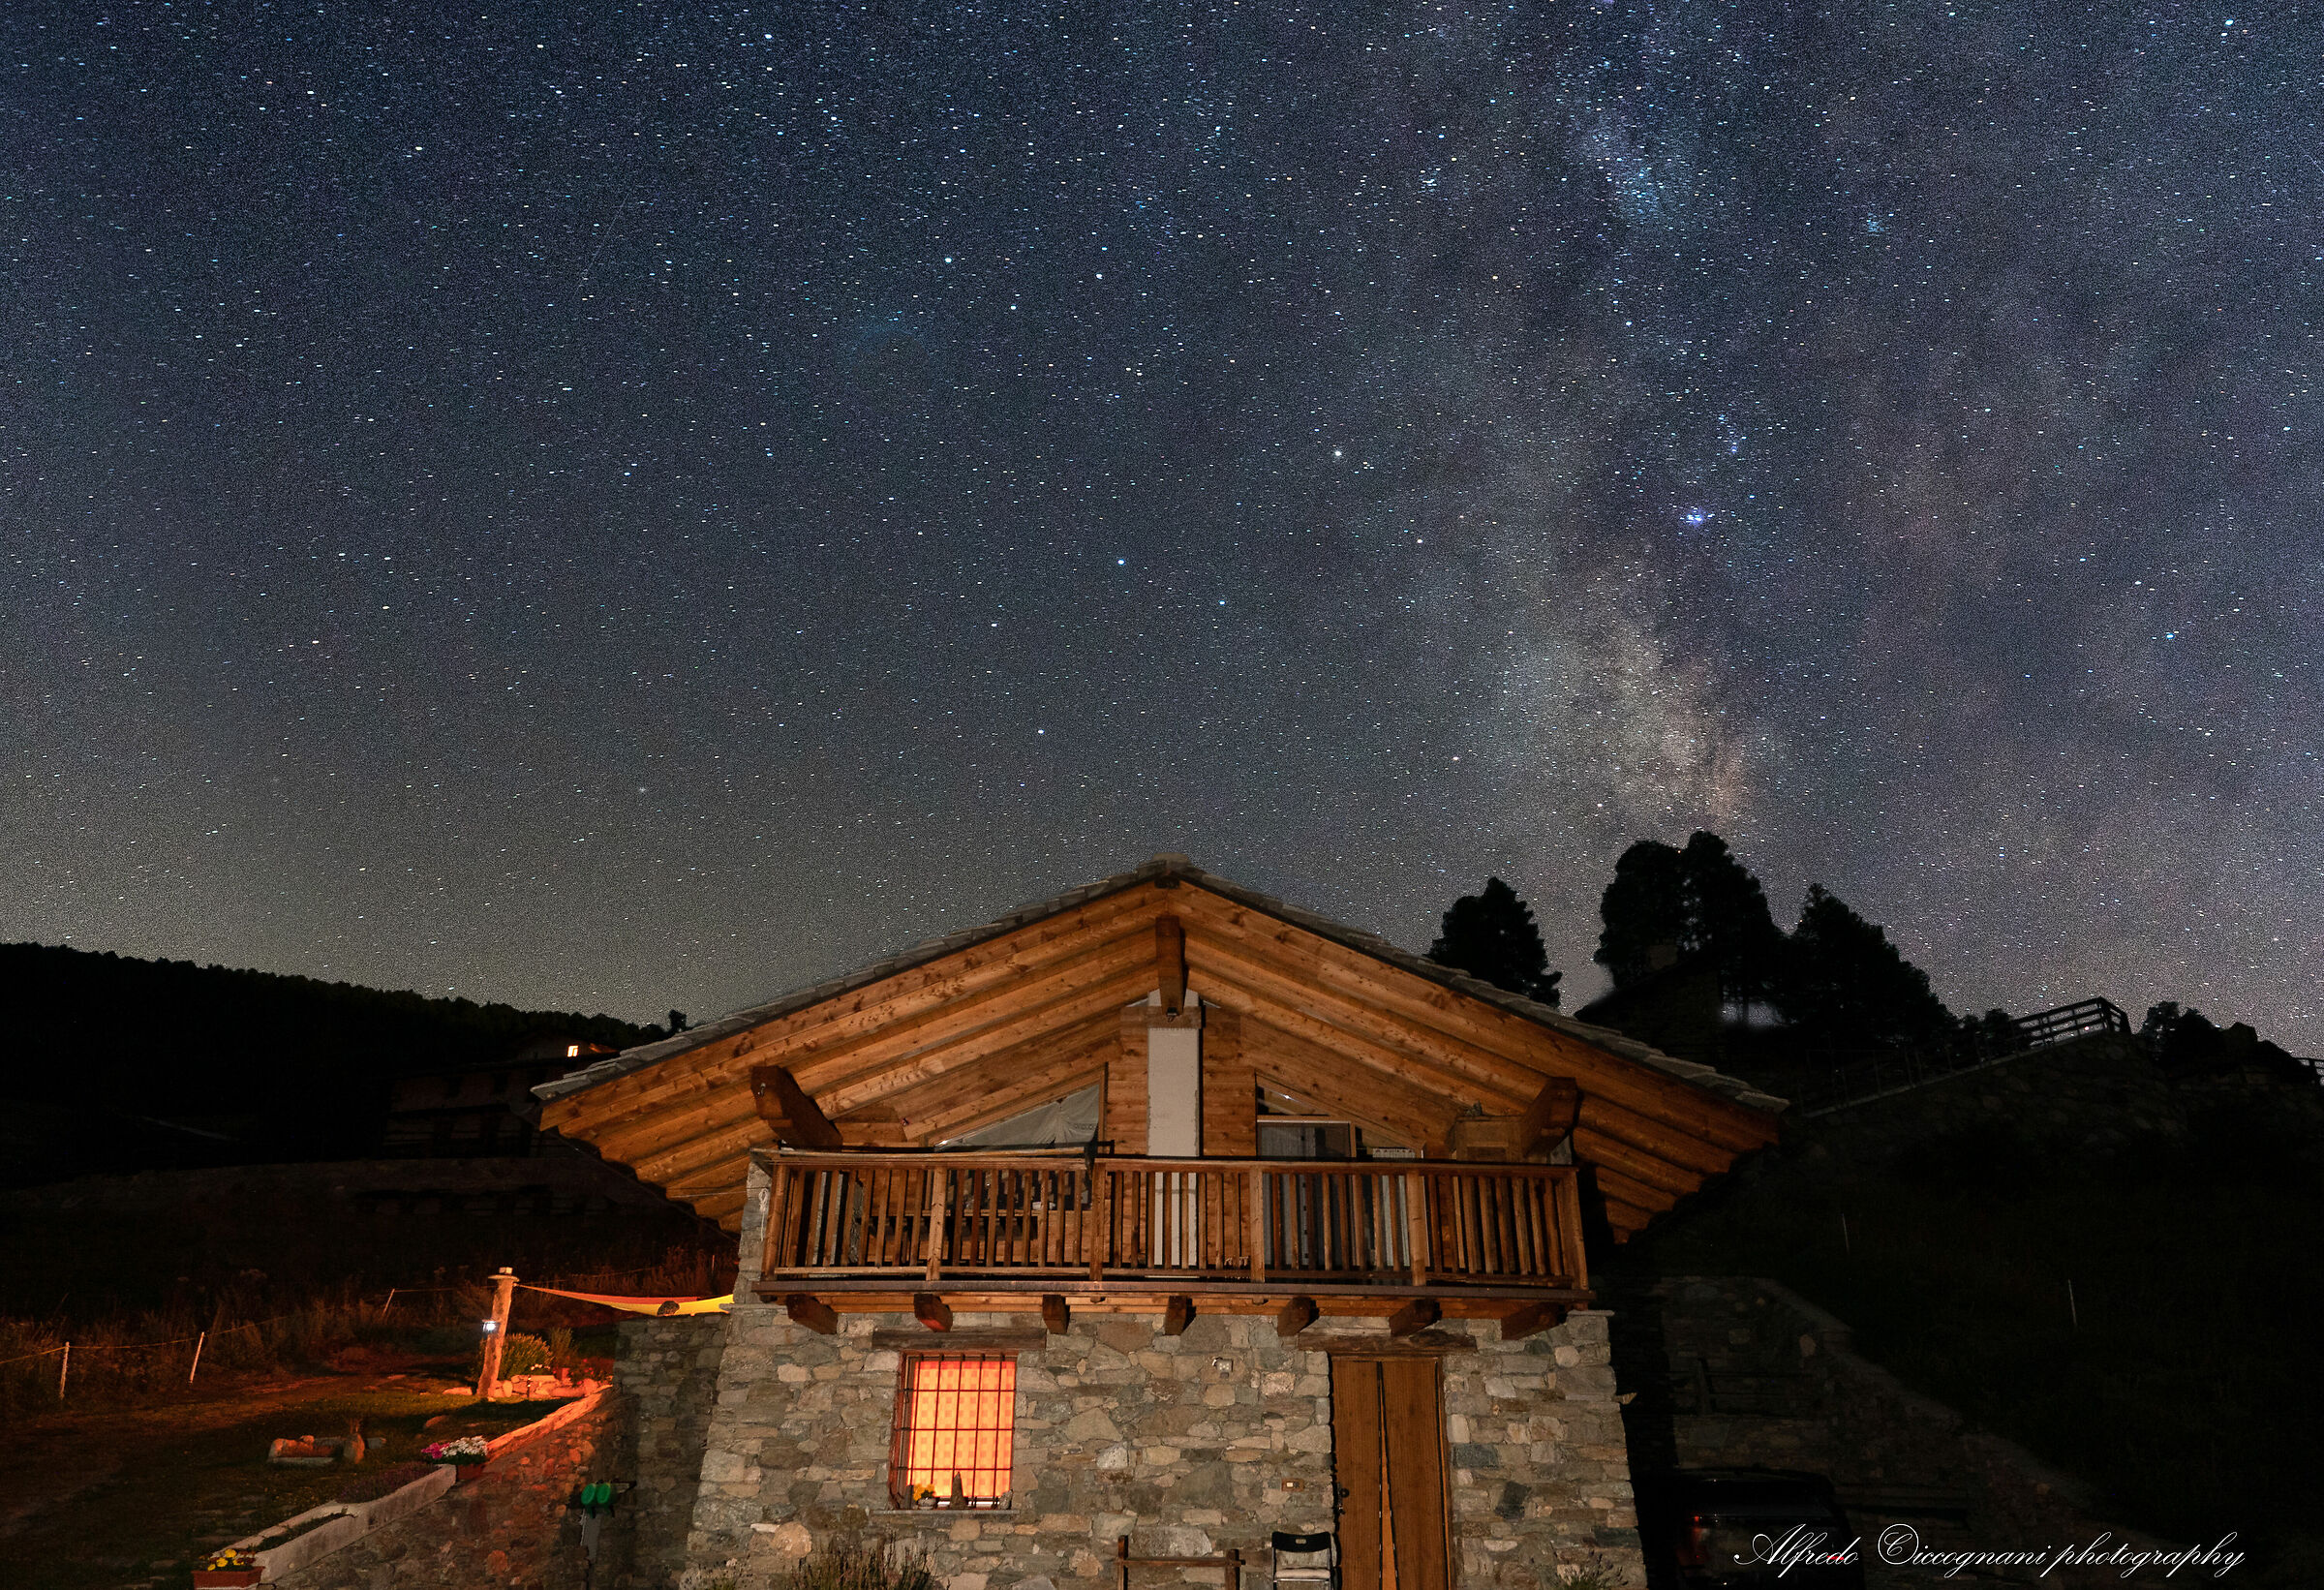 The cabin under the stars...